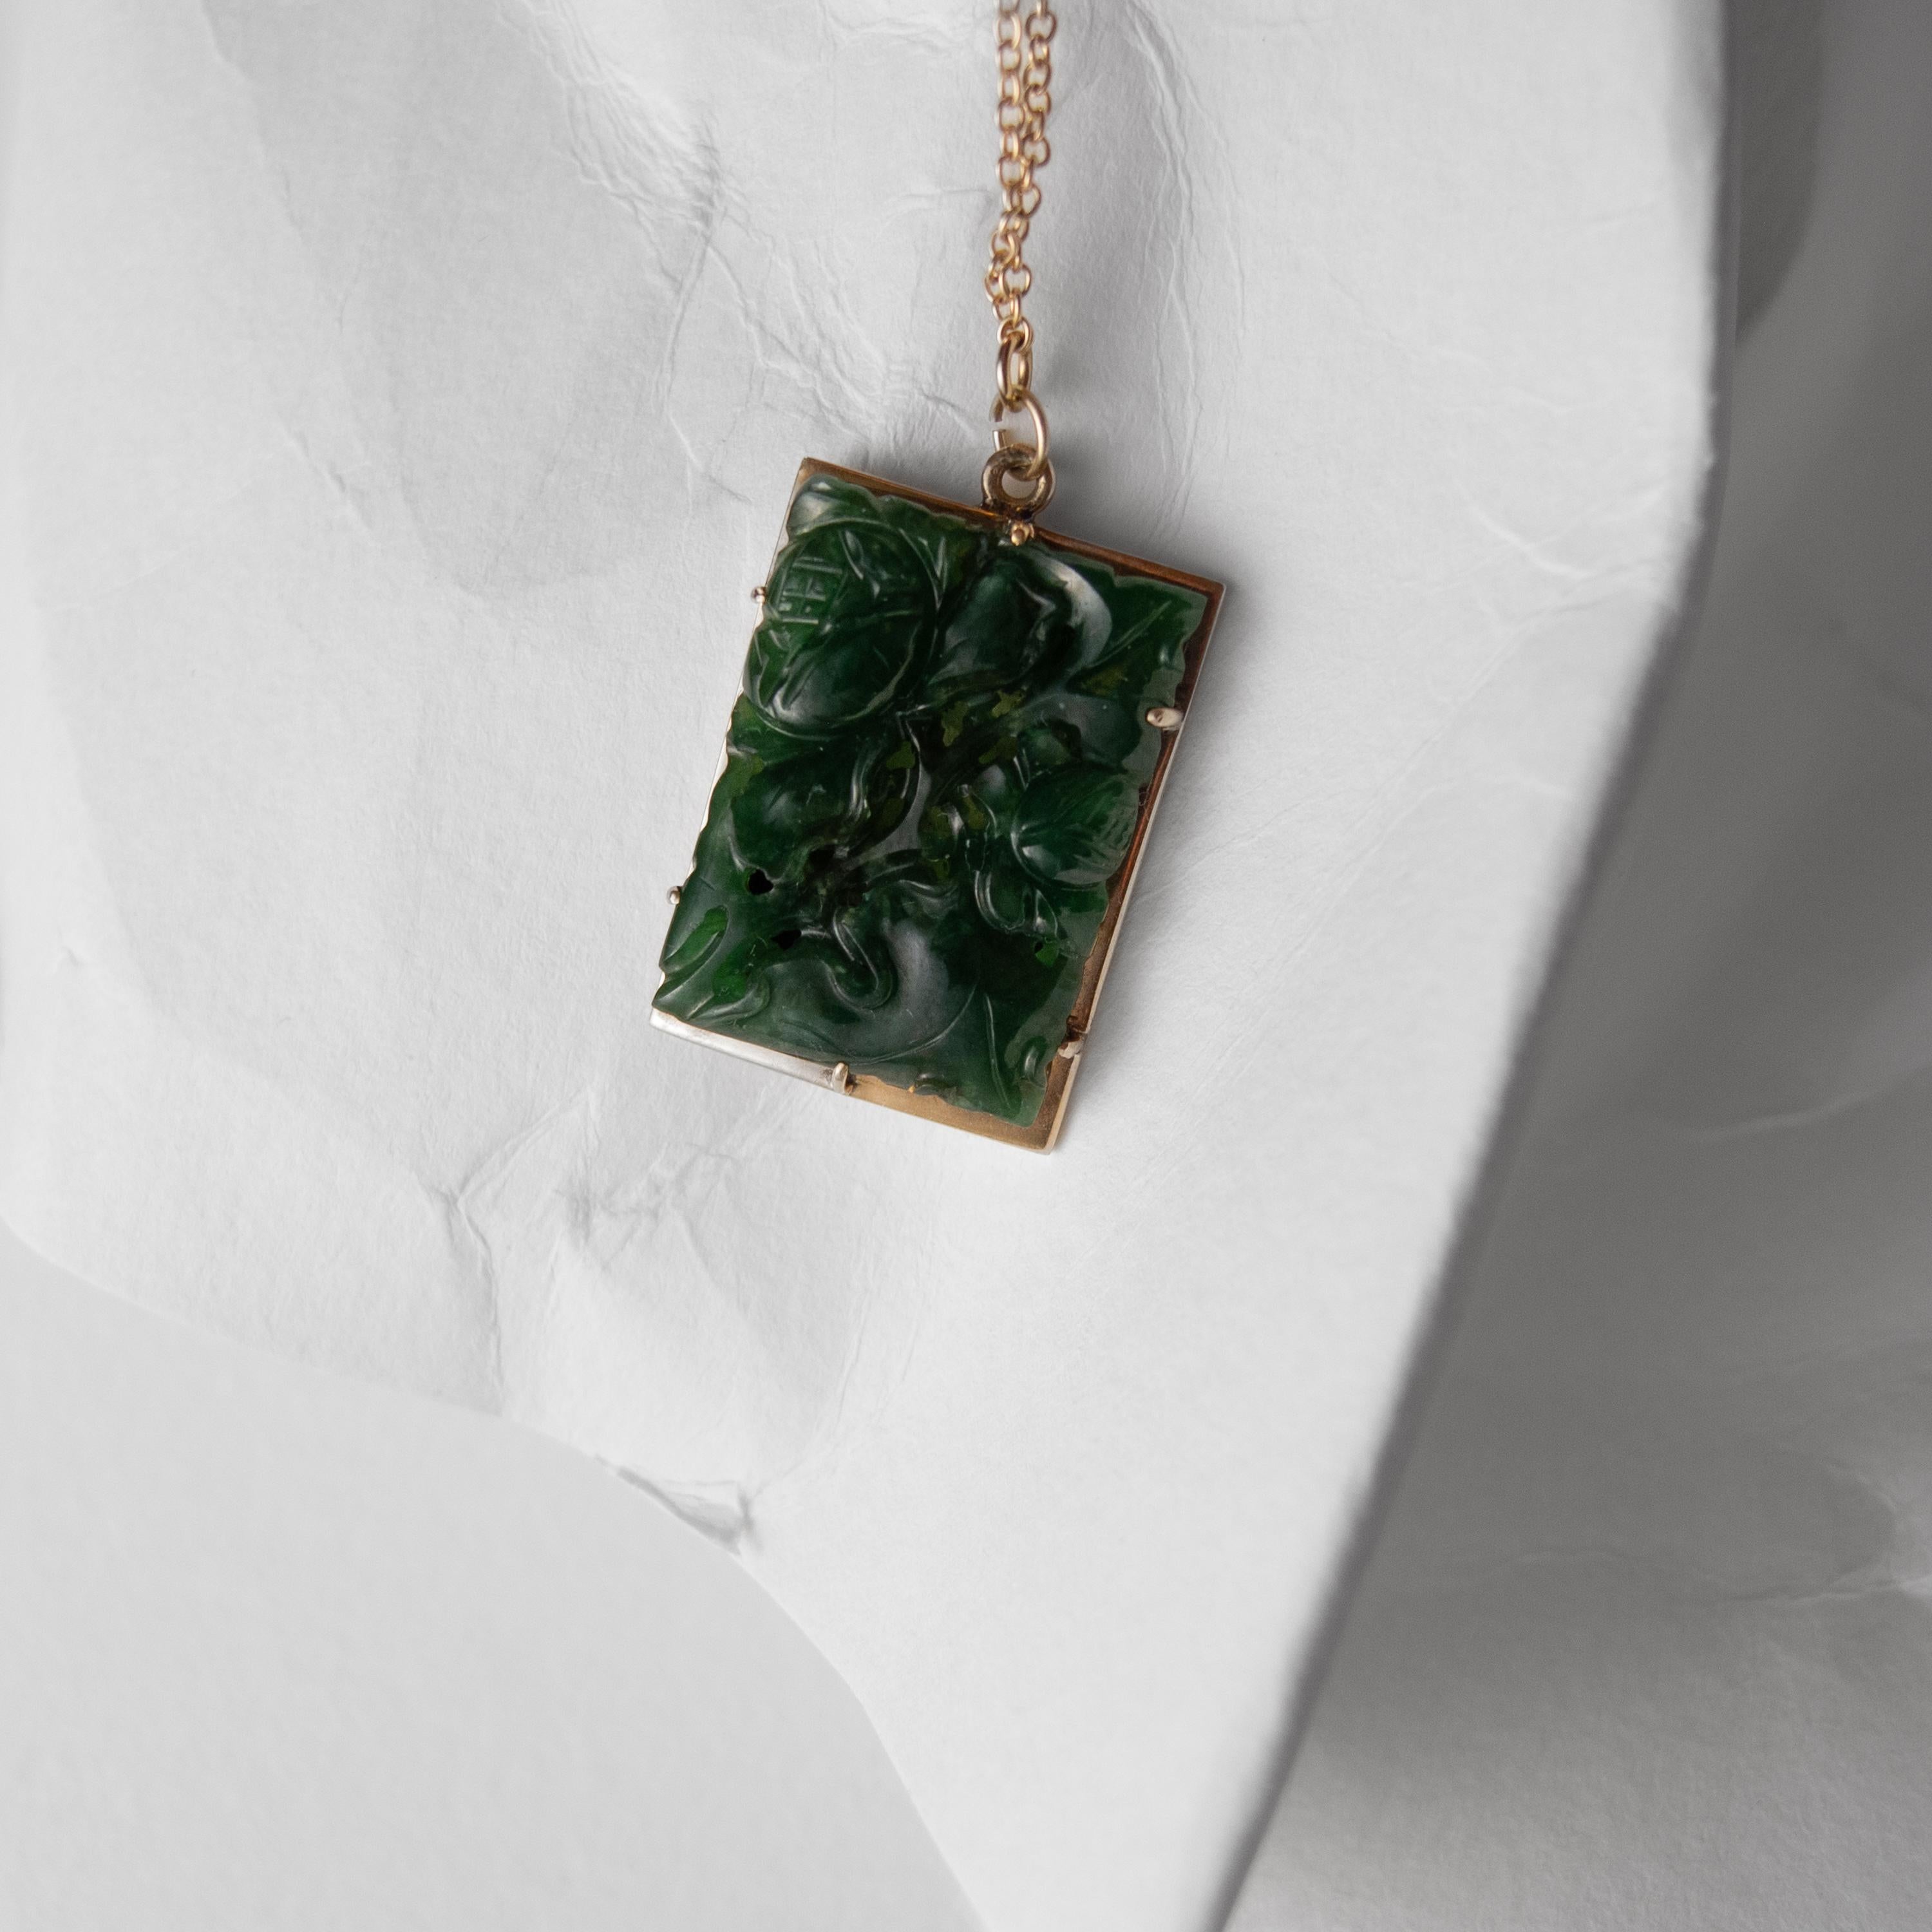 Carved Jade Pendant Midcentury Certified Untreated Omphacite Jade For Sale 5